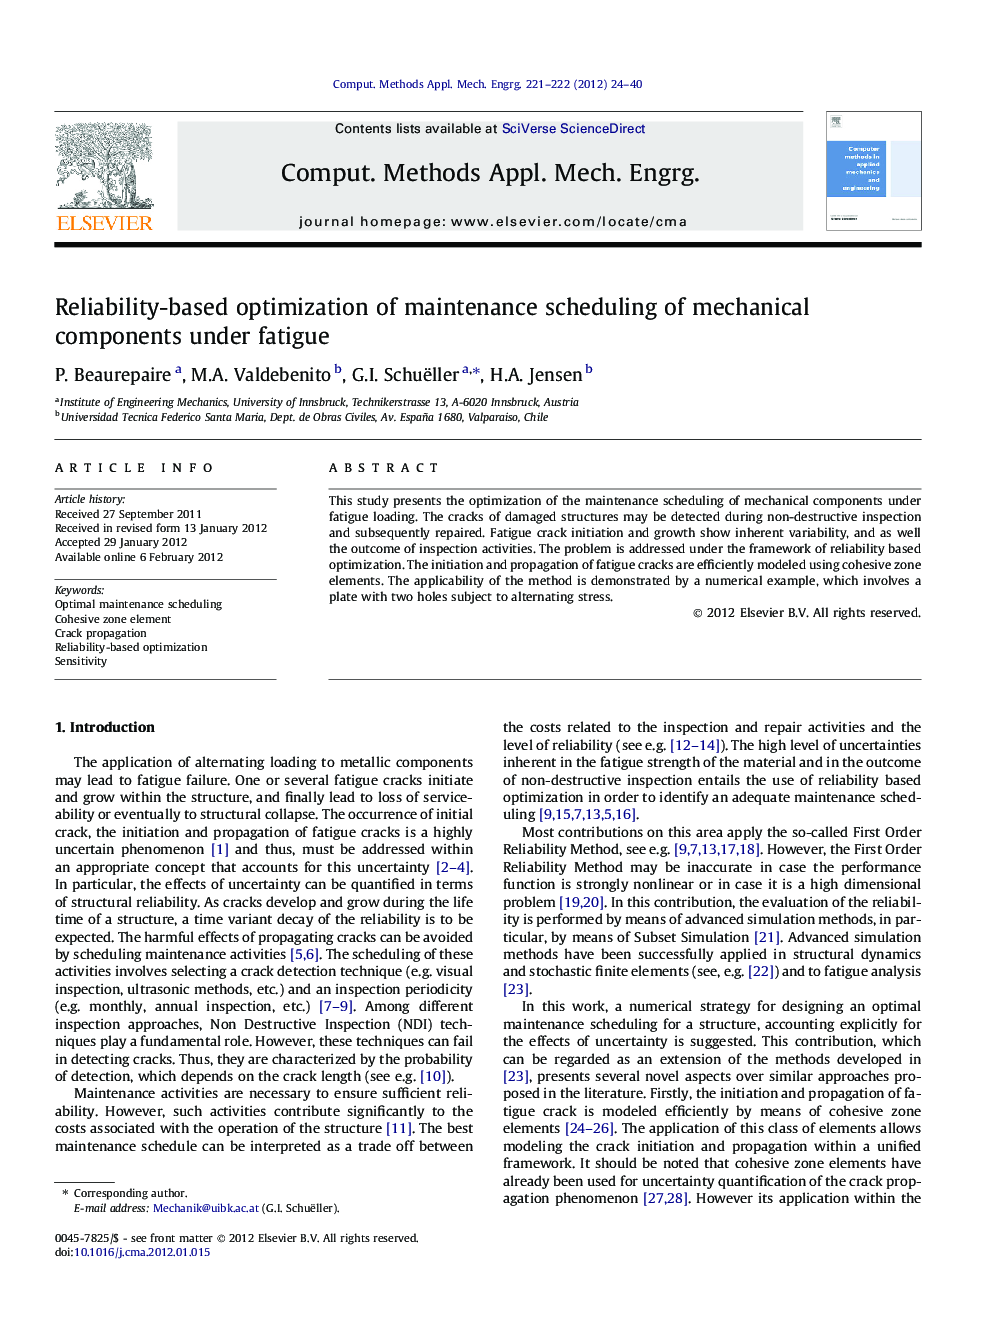 Reliability-based optimization of maintenance scheduling of mechanical components under fatigue